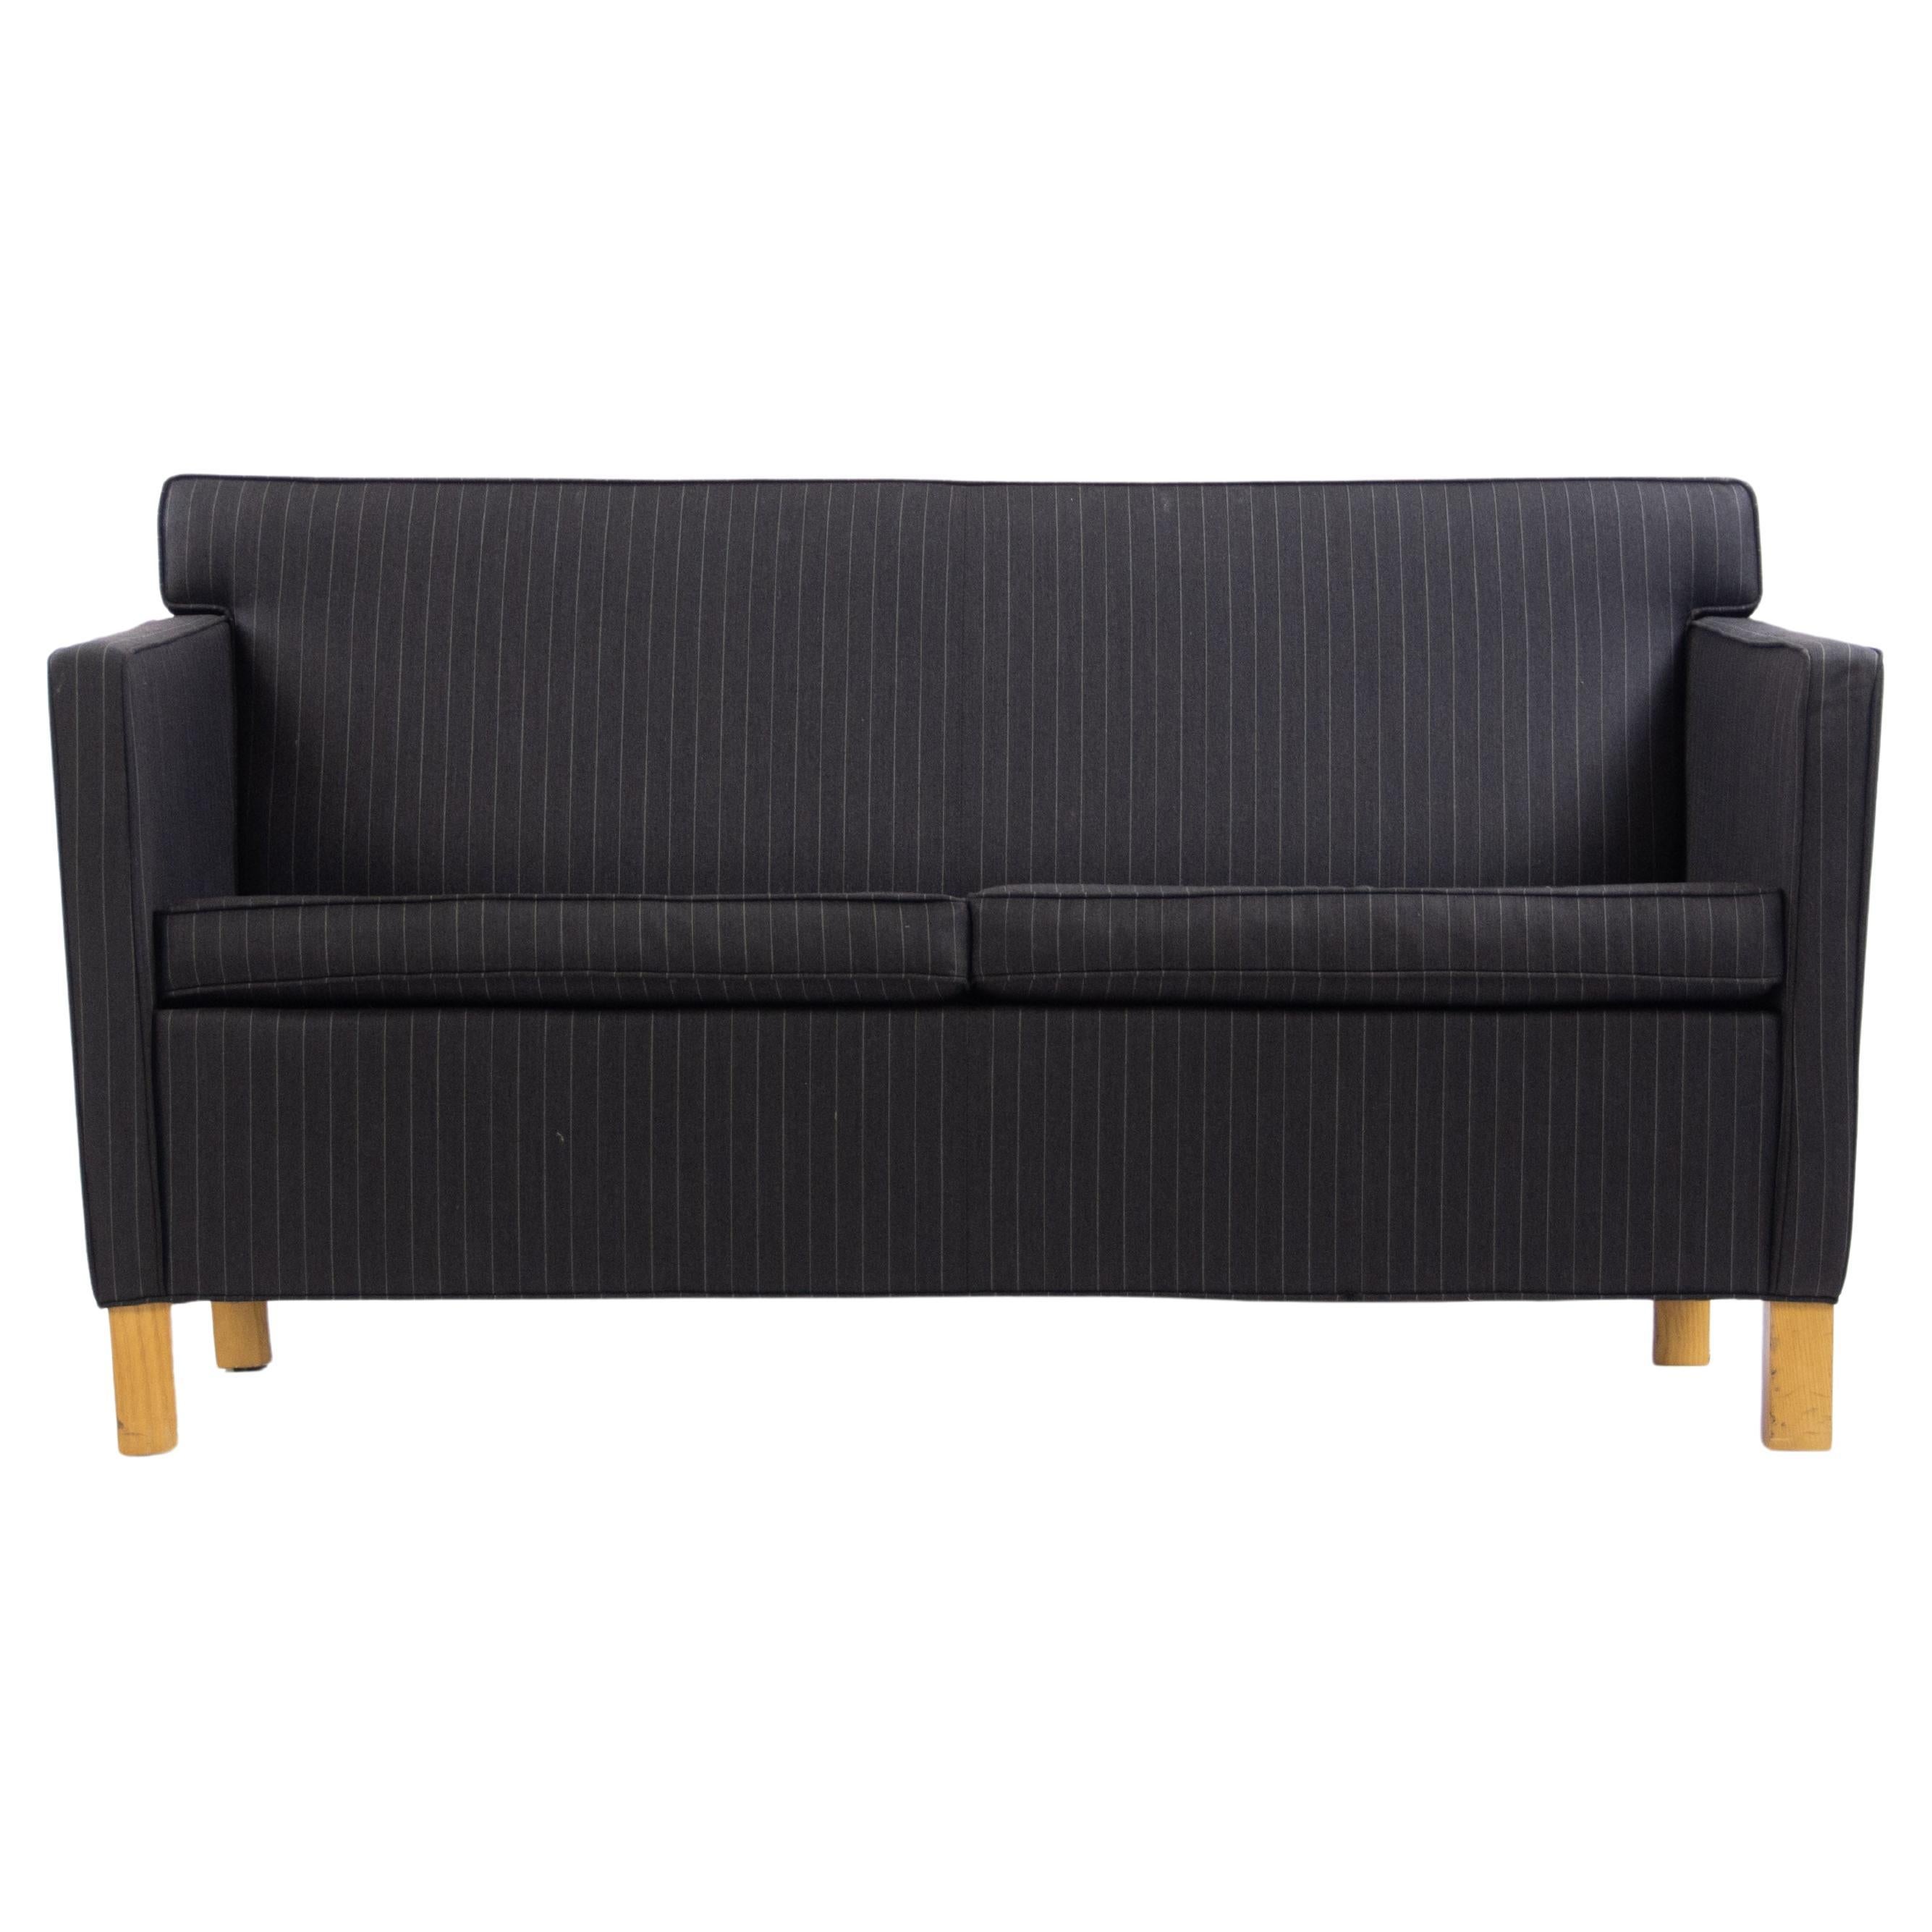 2010's Knoll Mies Van Der Rohe Krefeld Loveseat Sofa Fabric Sets Available For Sale